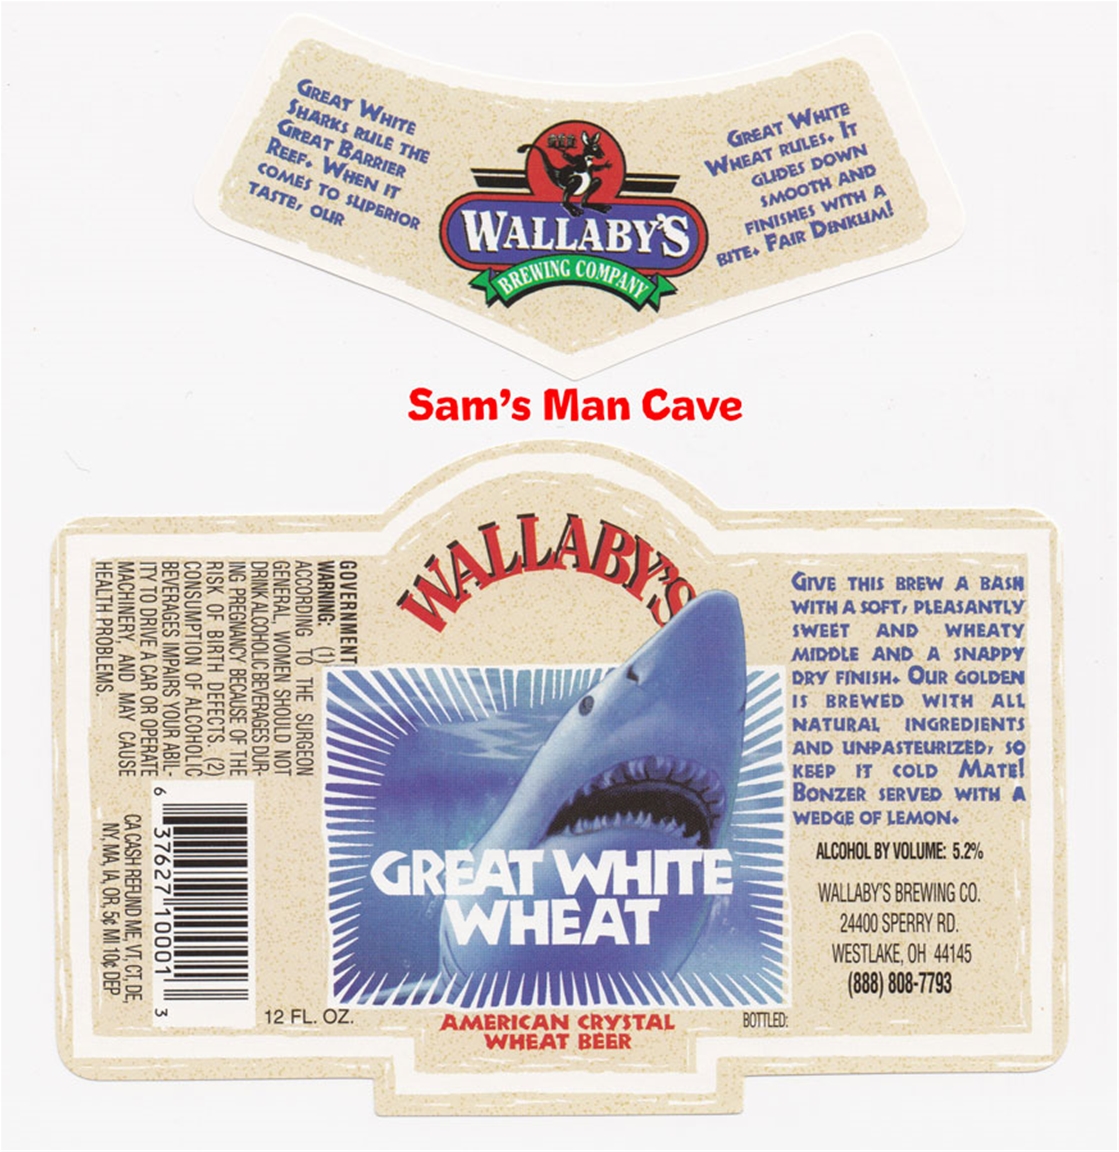 Wallaby's Great White Wheat Label